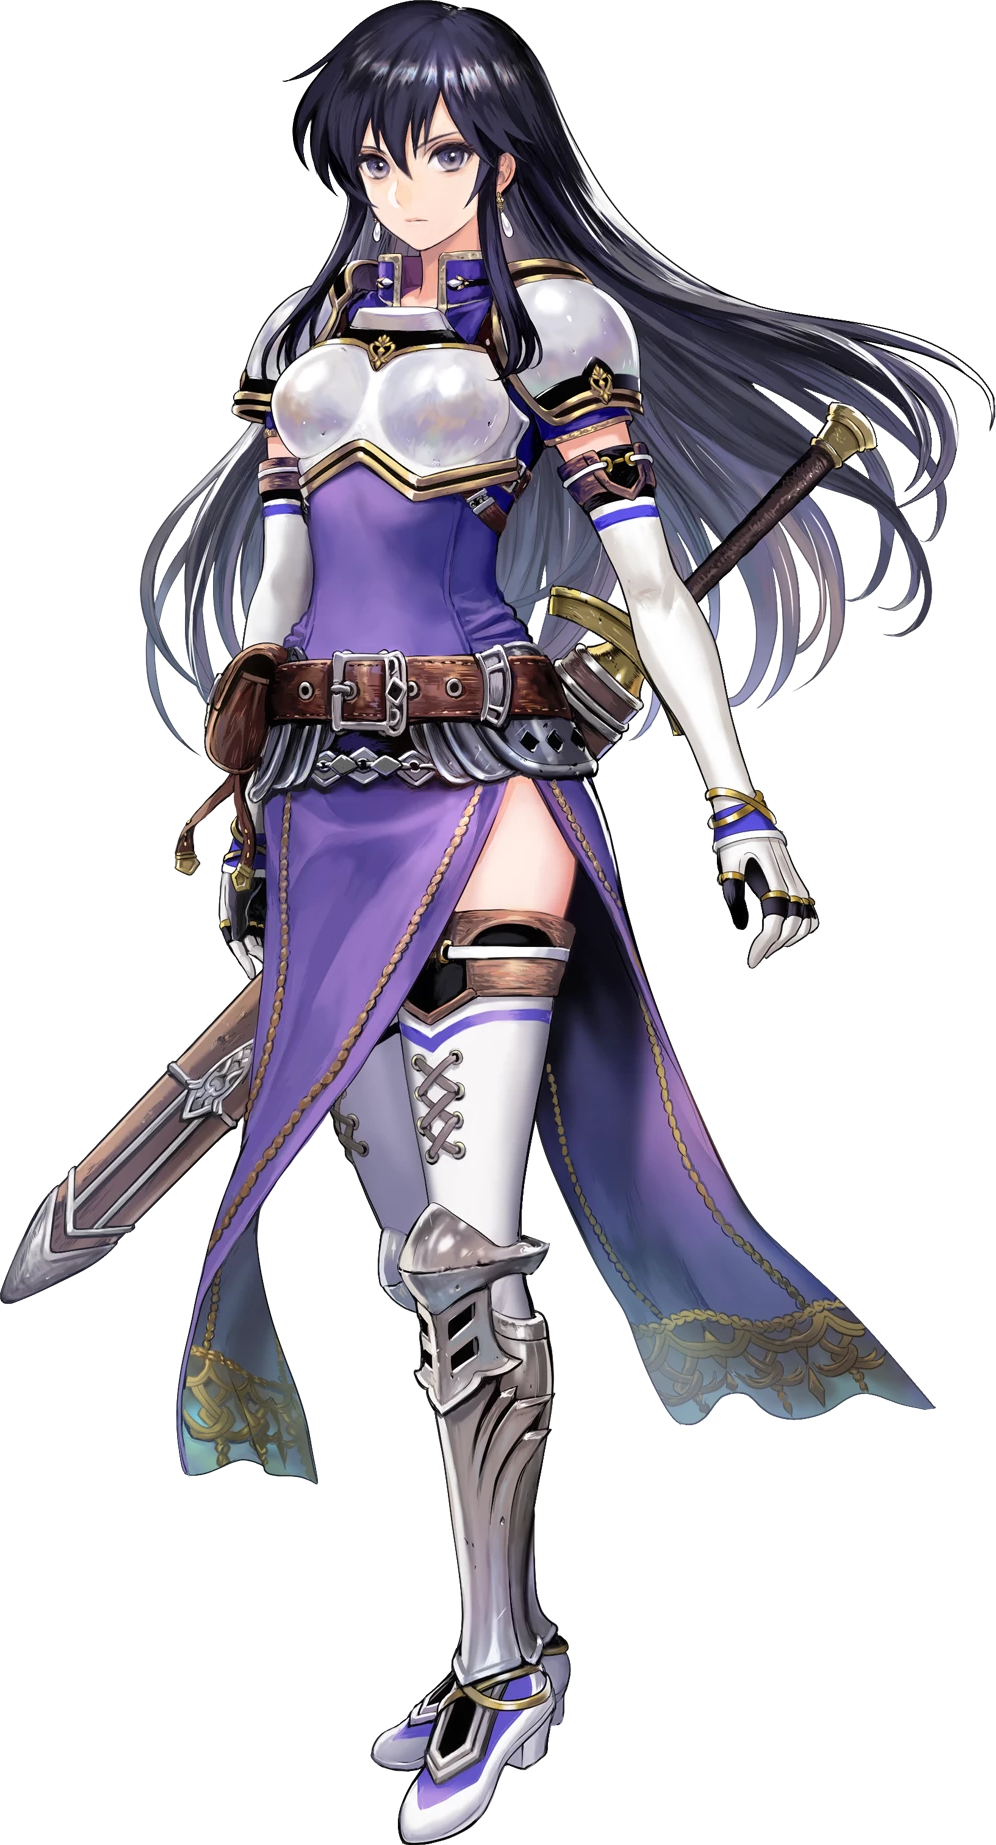 Ayra's portrait from Heroes. An intense woman with long dark hair, dressed in light silver armor and purple fabric.